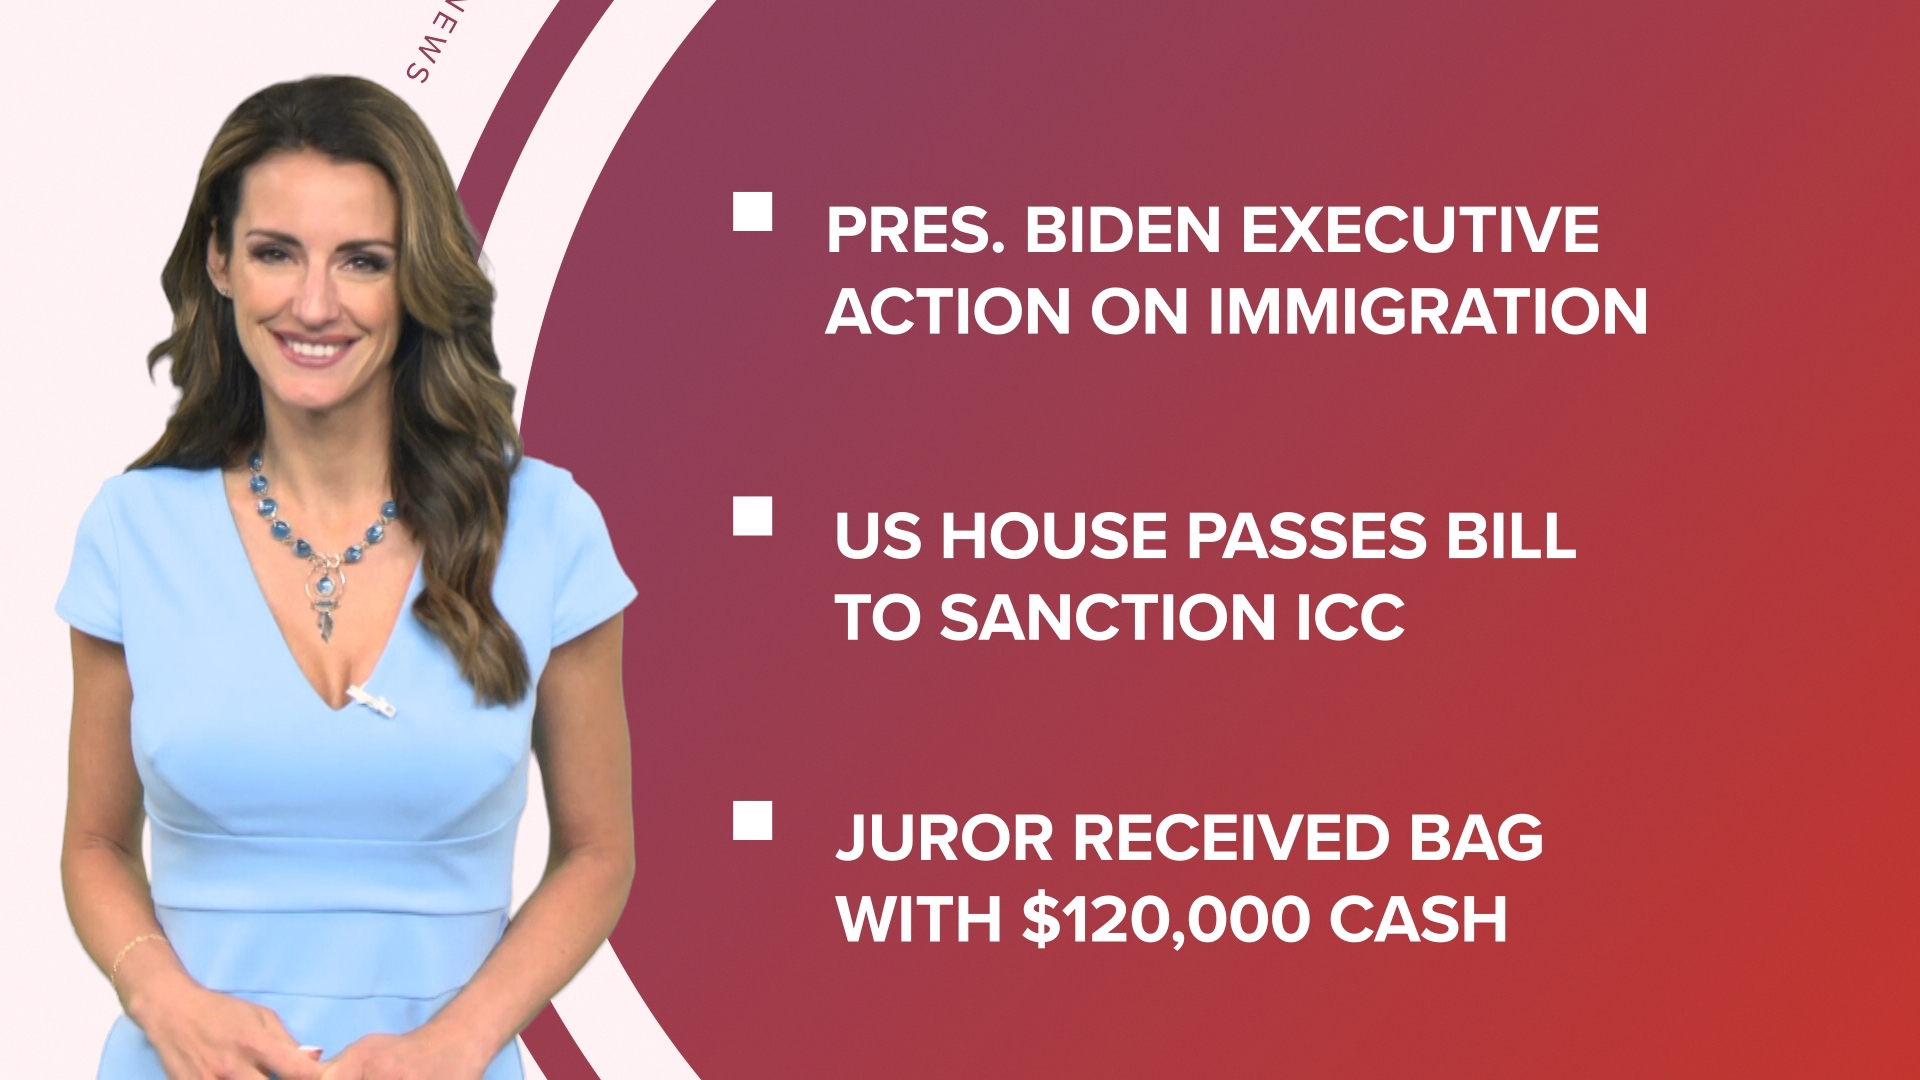 A look at what is happening in the news from Pres. Biden's executive action on immigration to Dr Pepper now tied for second best soda brand in the U.S. and more.